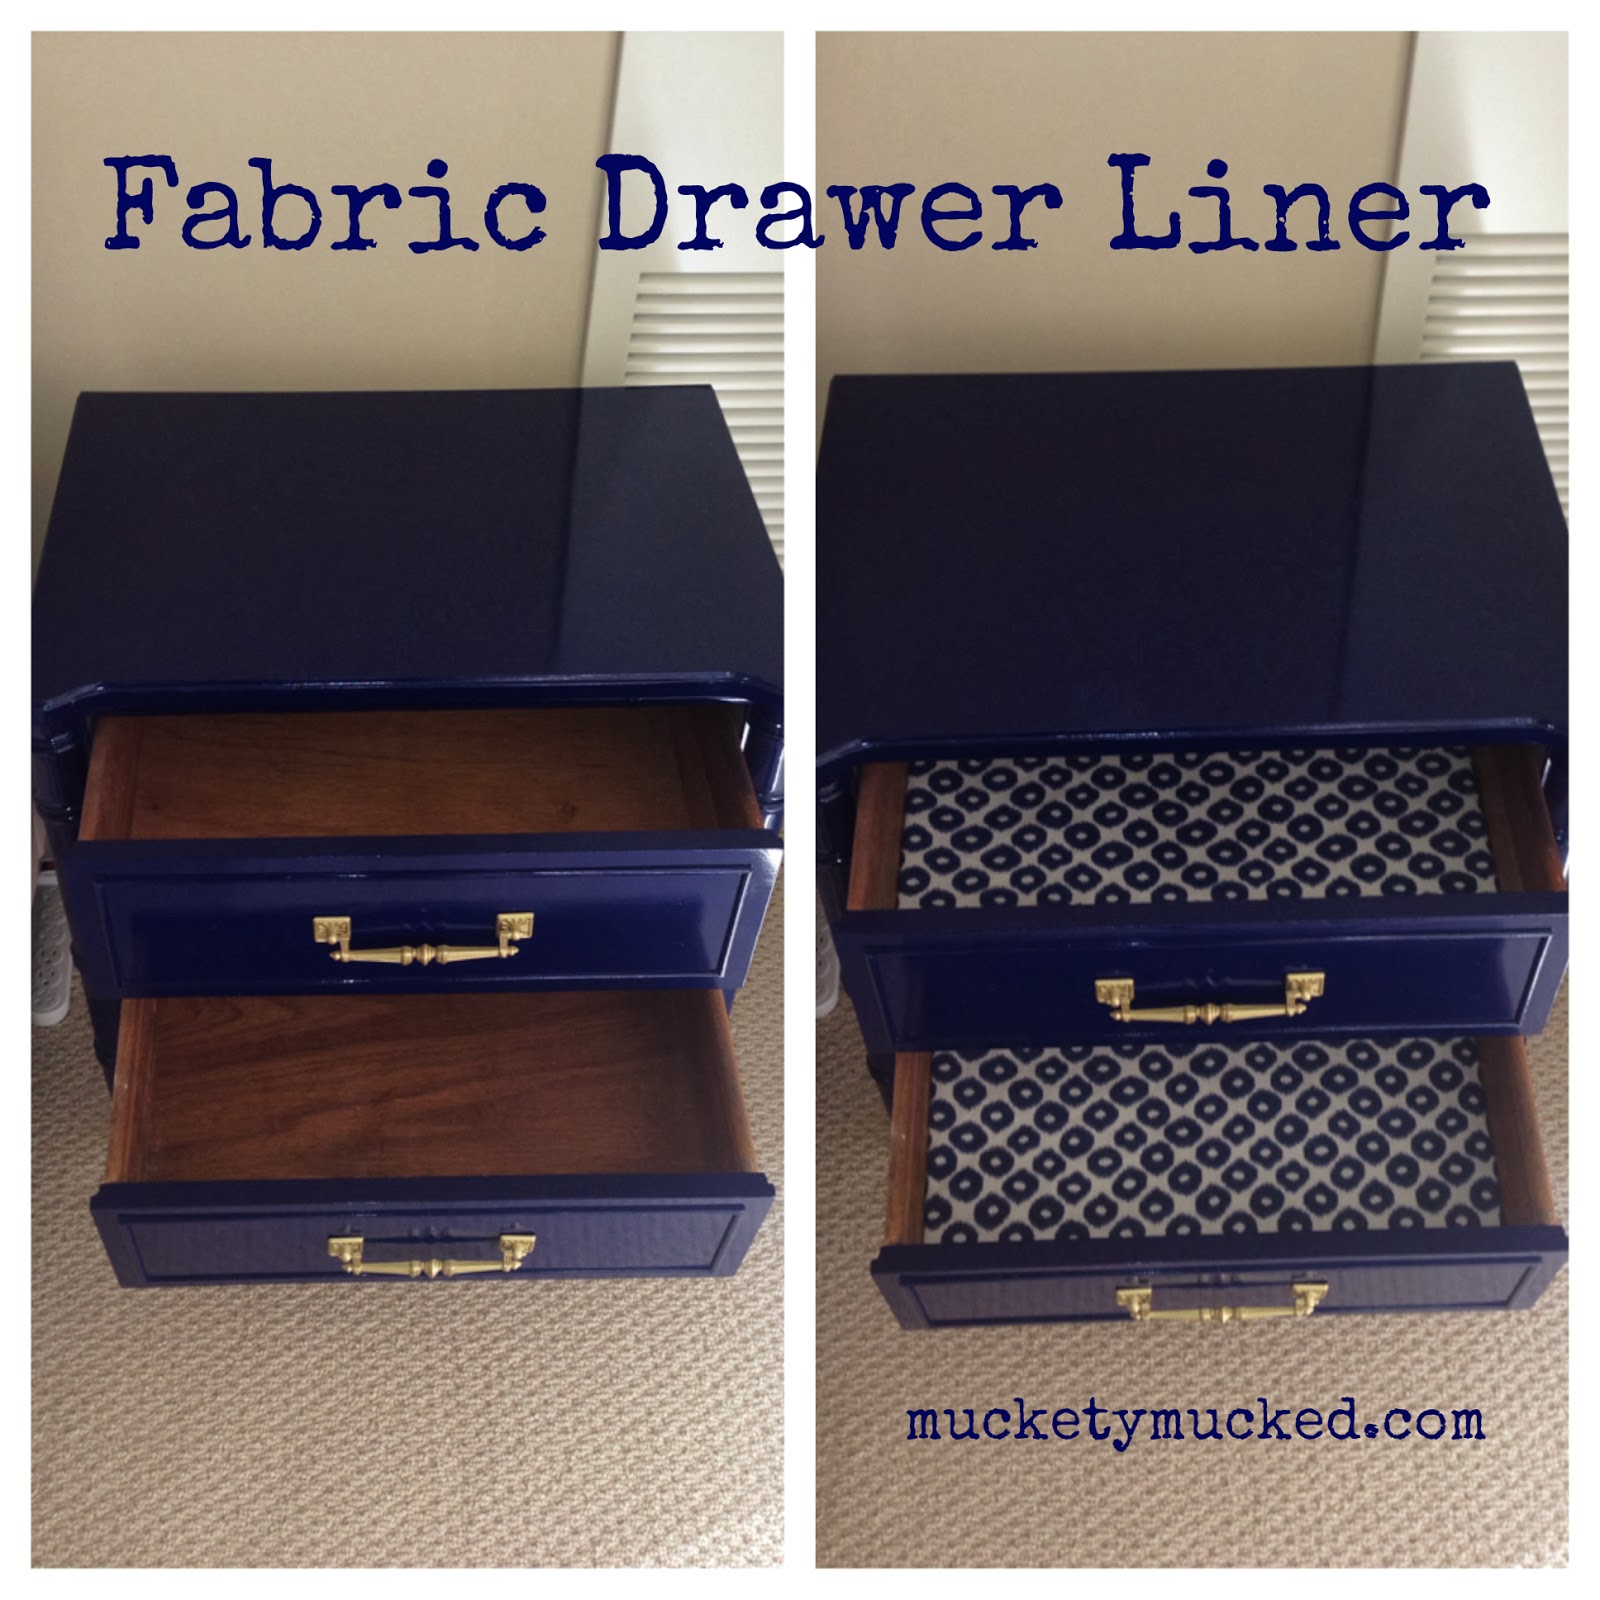 Muckety Mucked: Craft fail & recovery. Lining drawers with fabric